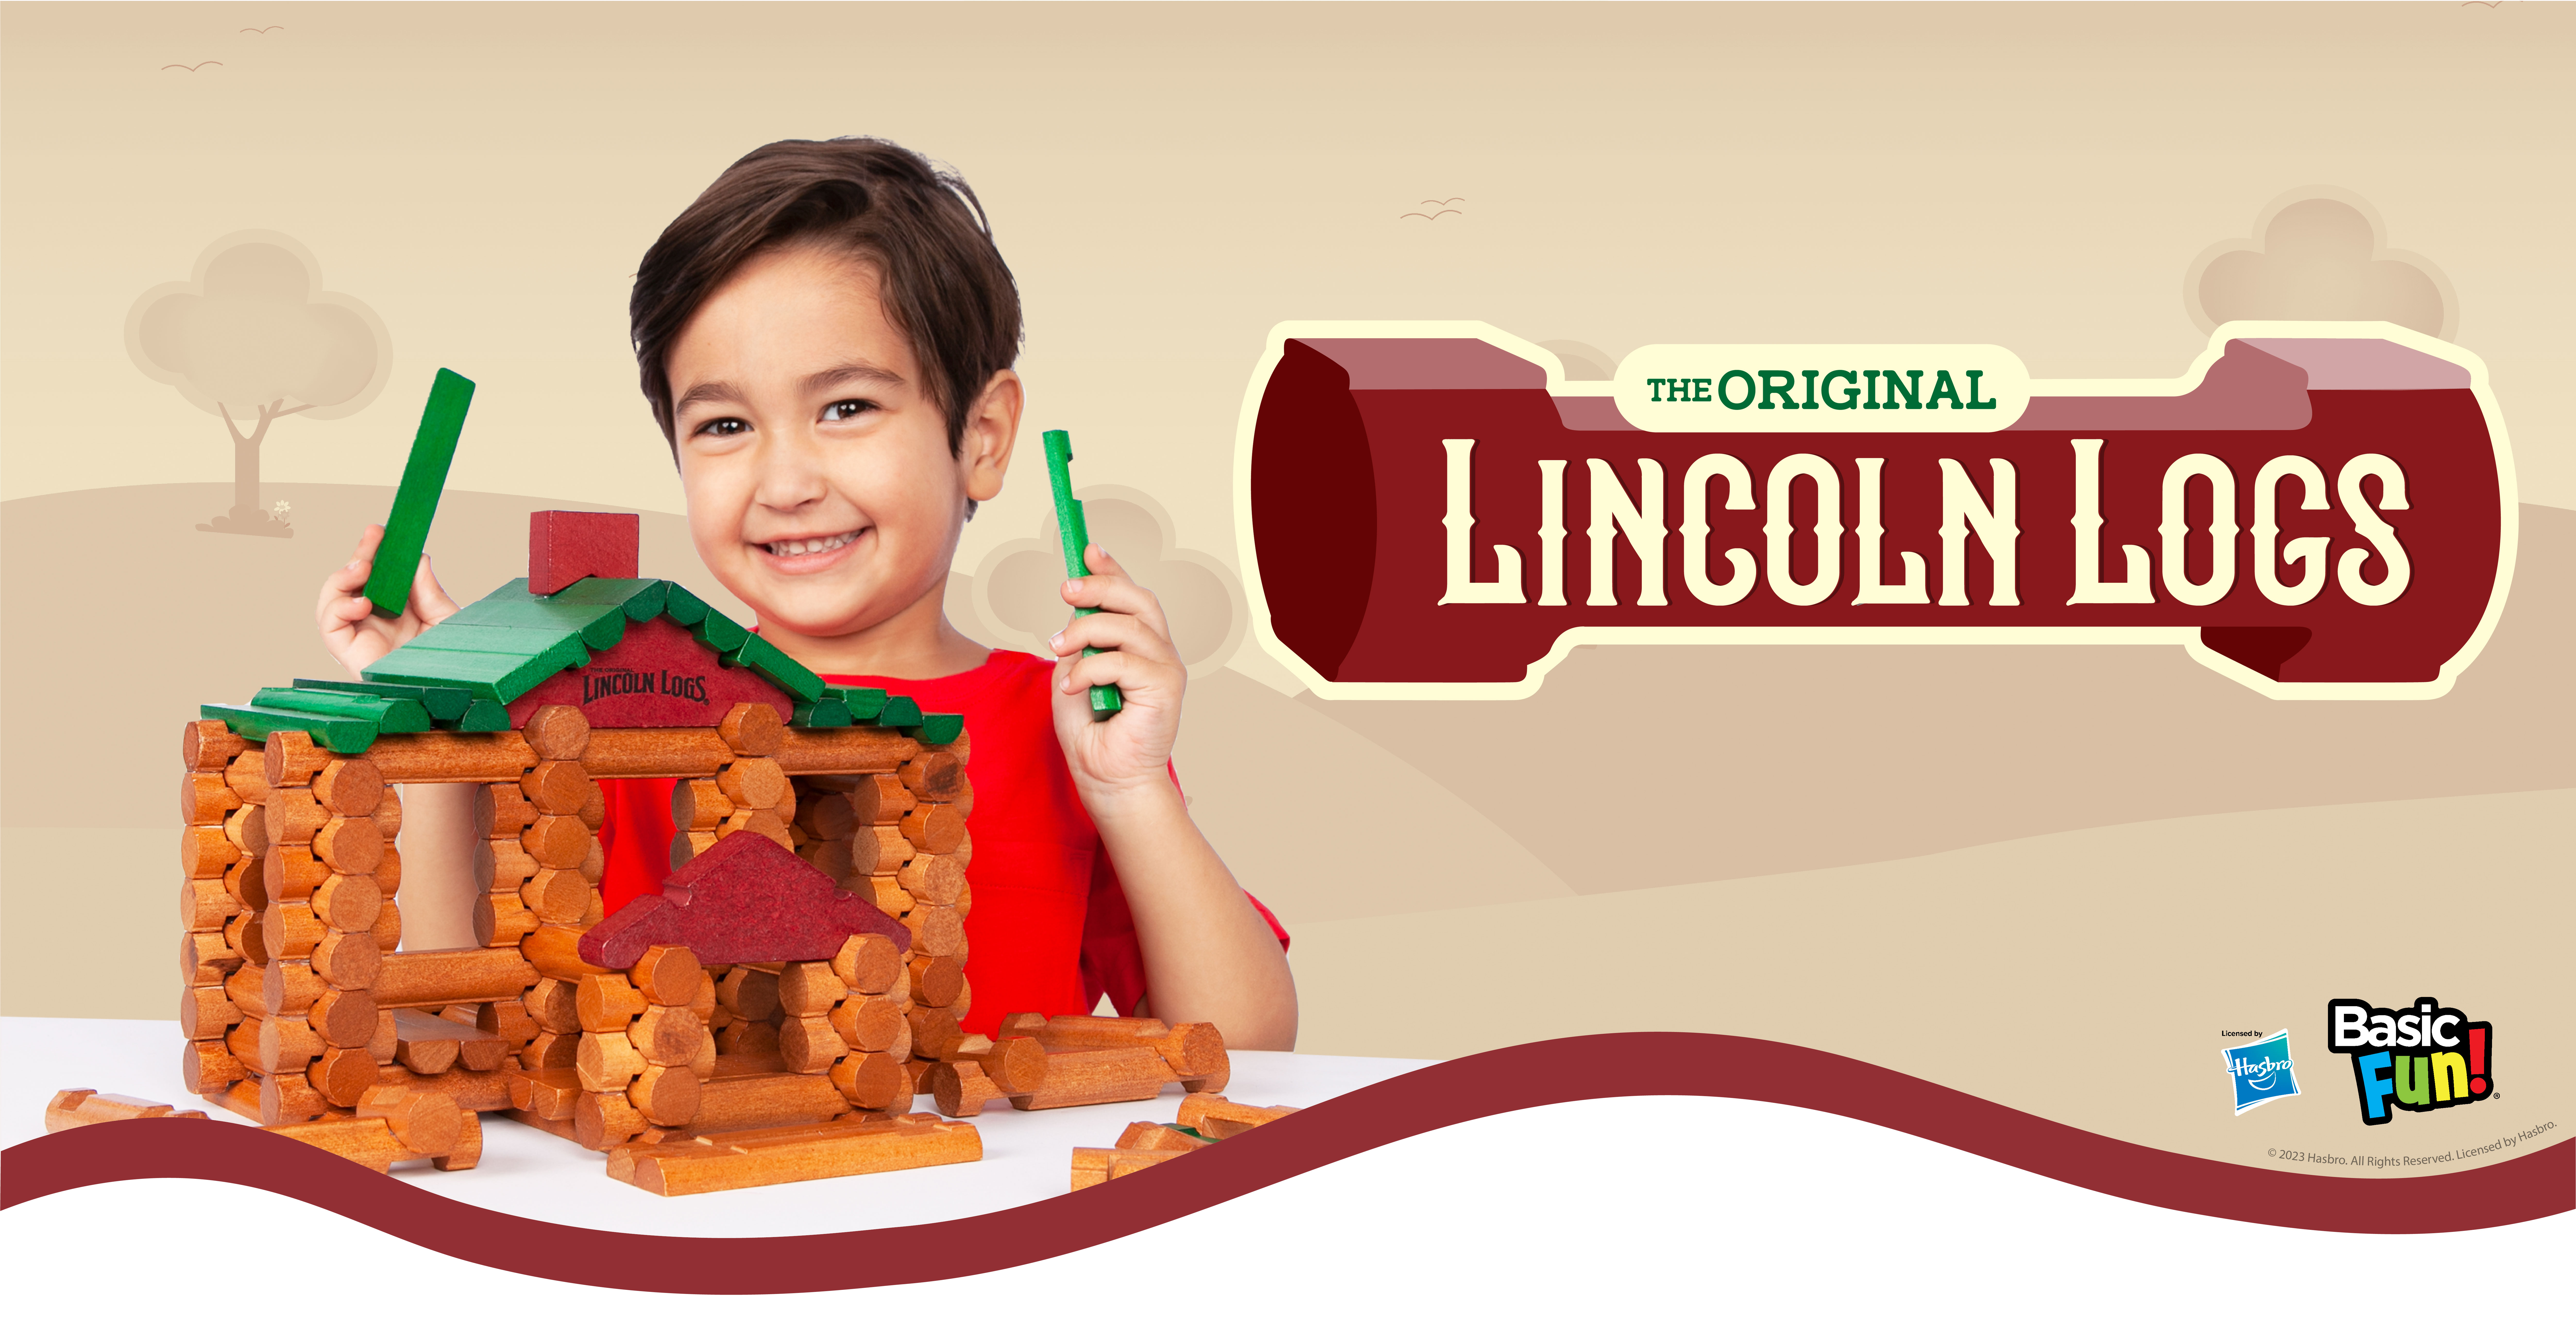 Lincoln Logs banner showing a boy playing with Lincoln Logs